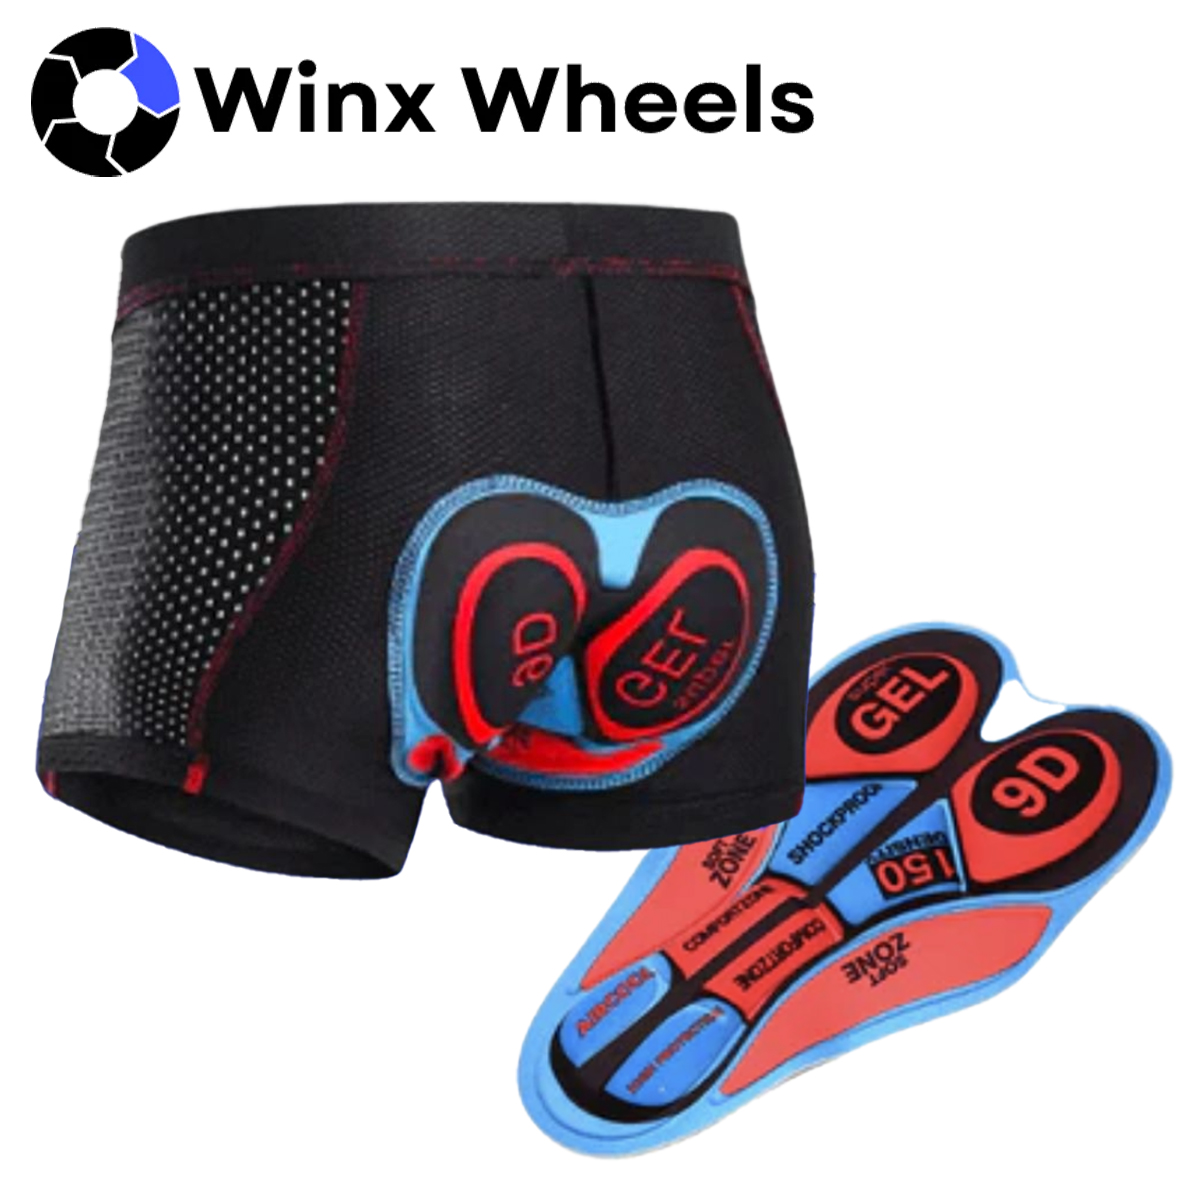 Winx Wheels Adapt Ultra Shorts for Motorcycle Riders - Apex 66